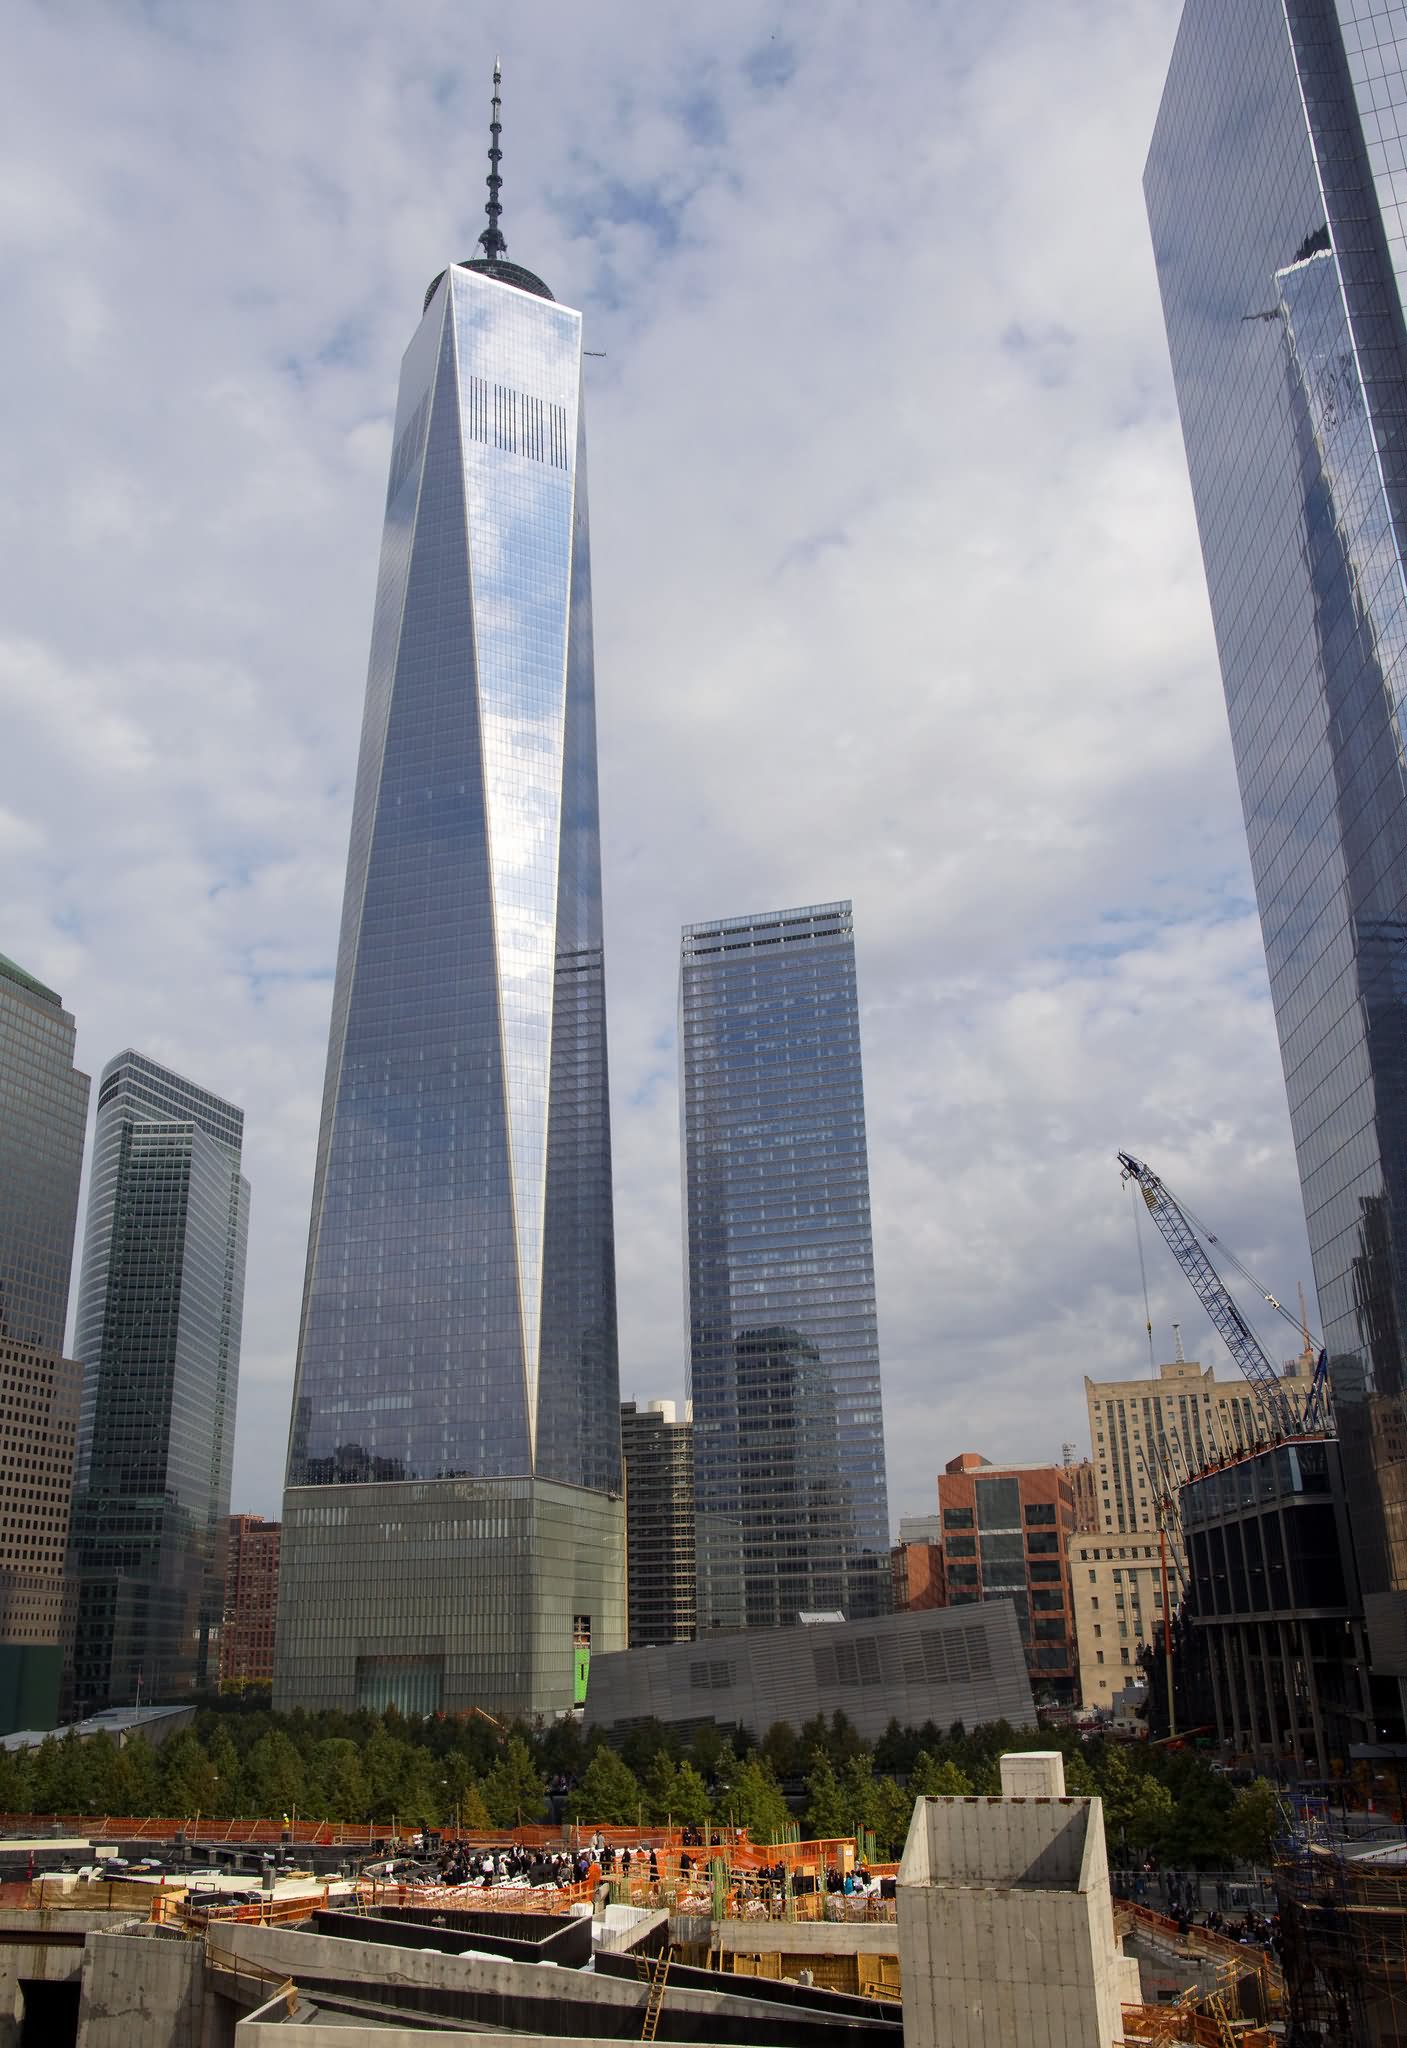 Full Size Image of One World Trade Center